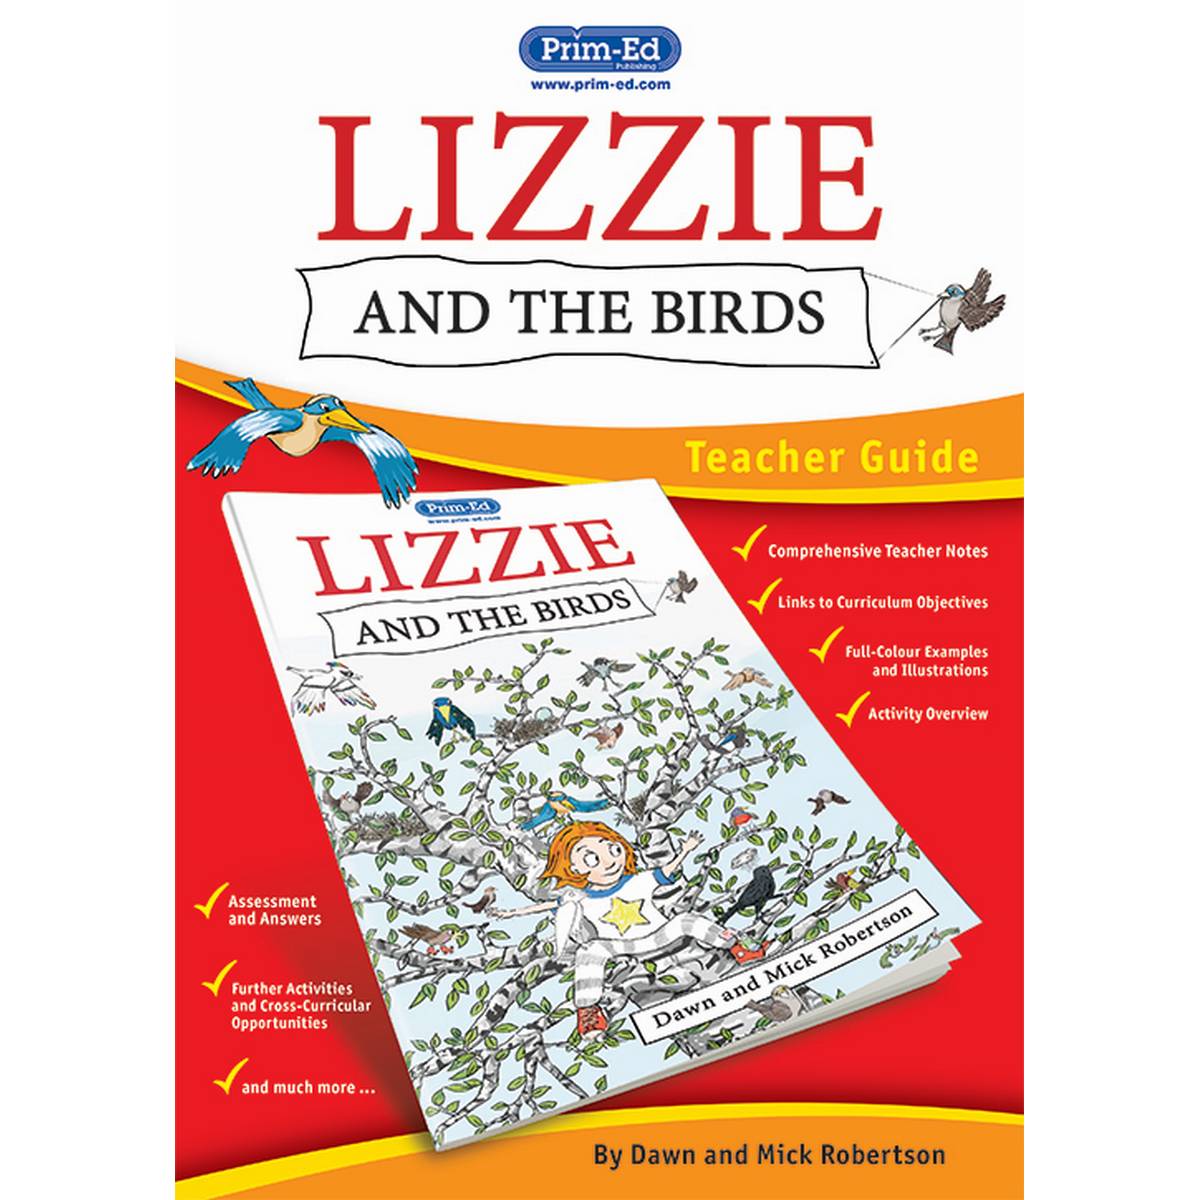 Lizzie and the Birds Teacher Guide